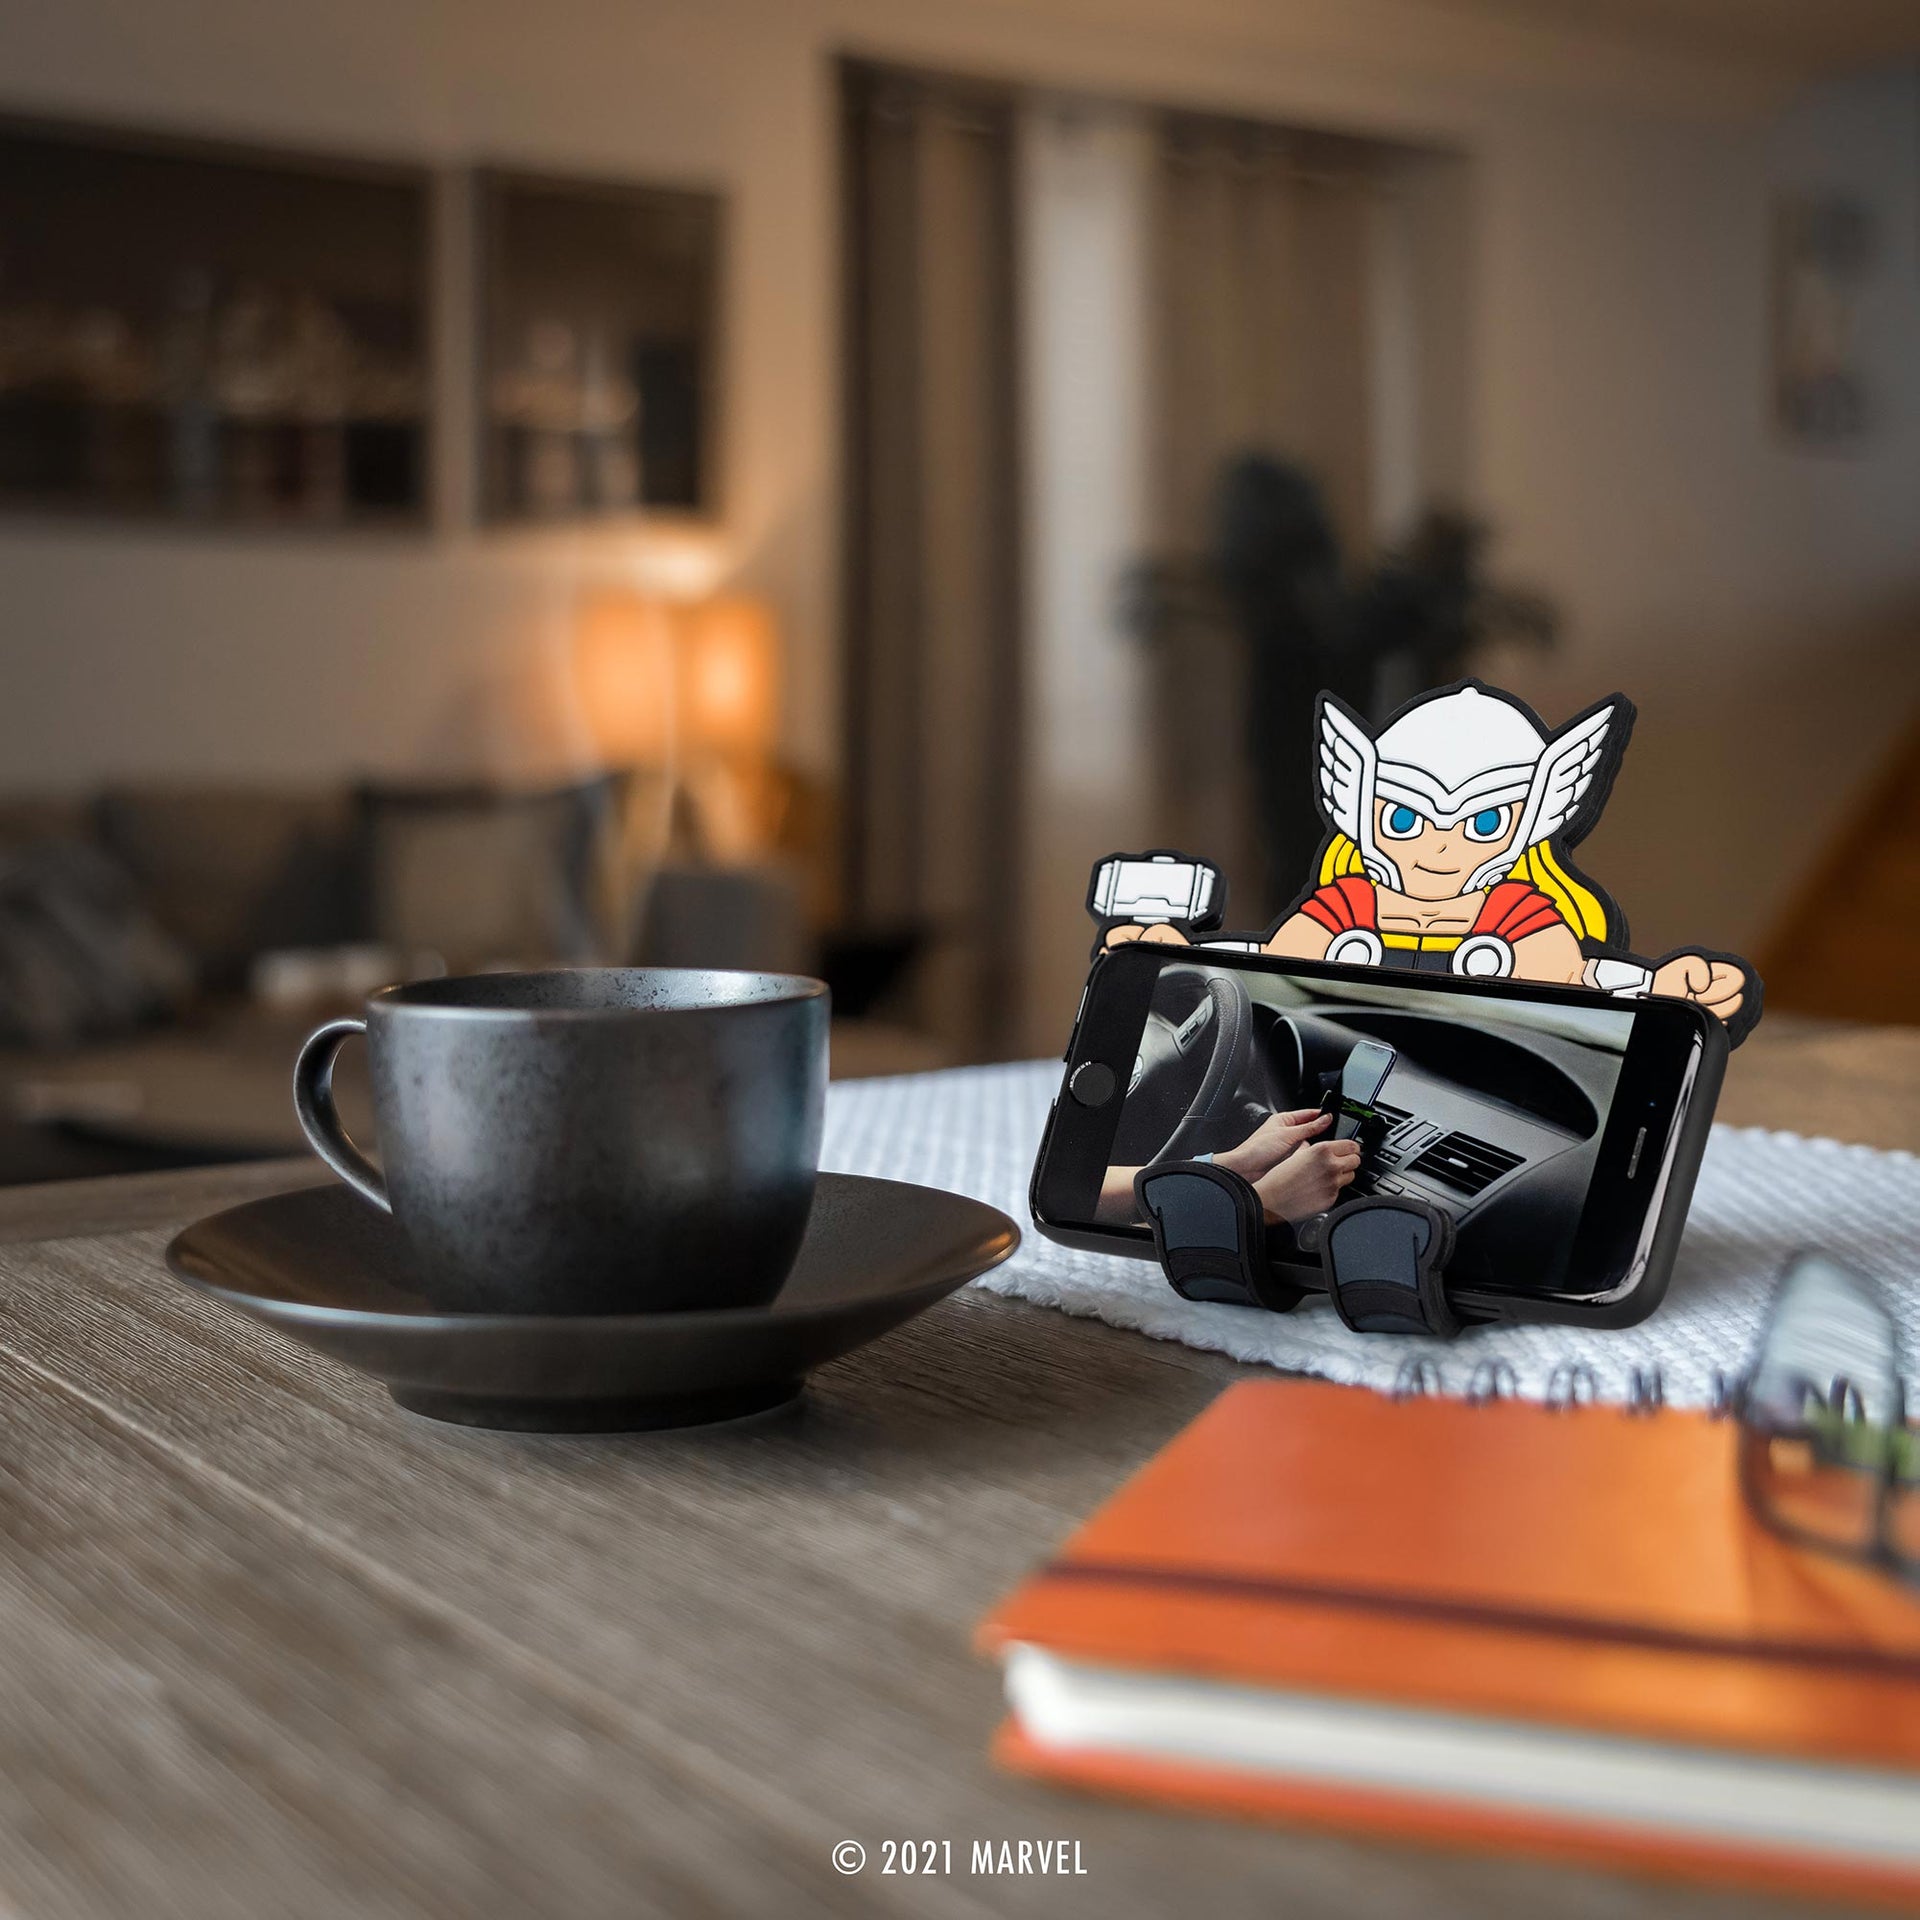 Image of Marvel Comics Thor Hug Buddy holding a cell phone on top of a kitchen table beside a warm cup of coffee or tea